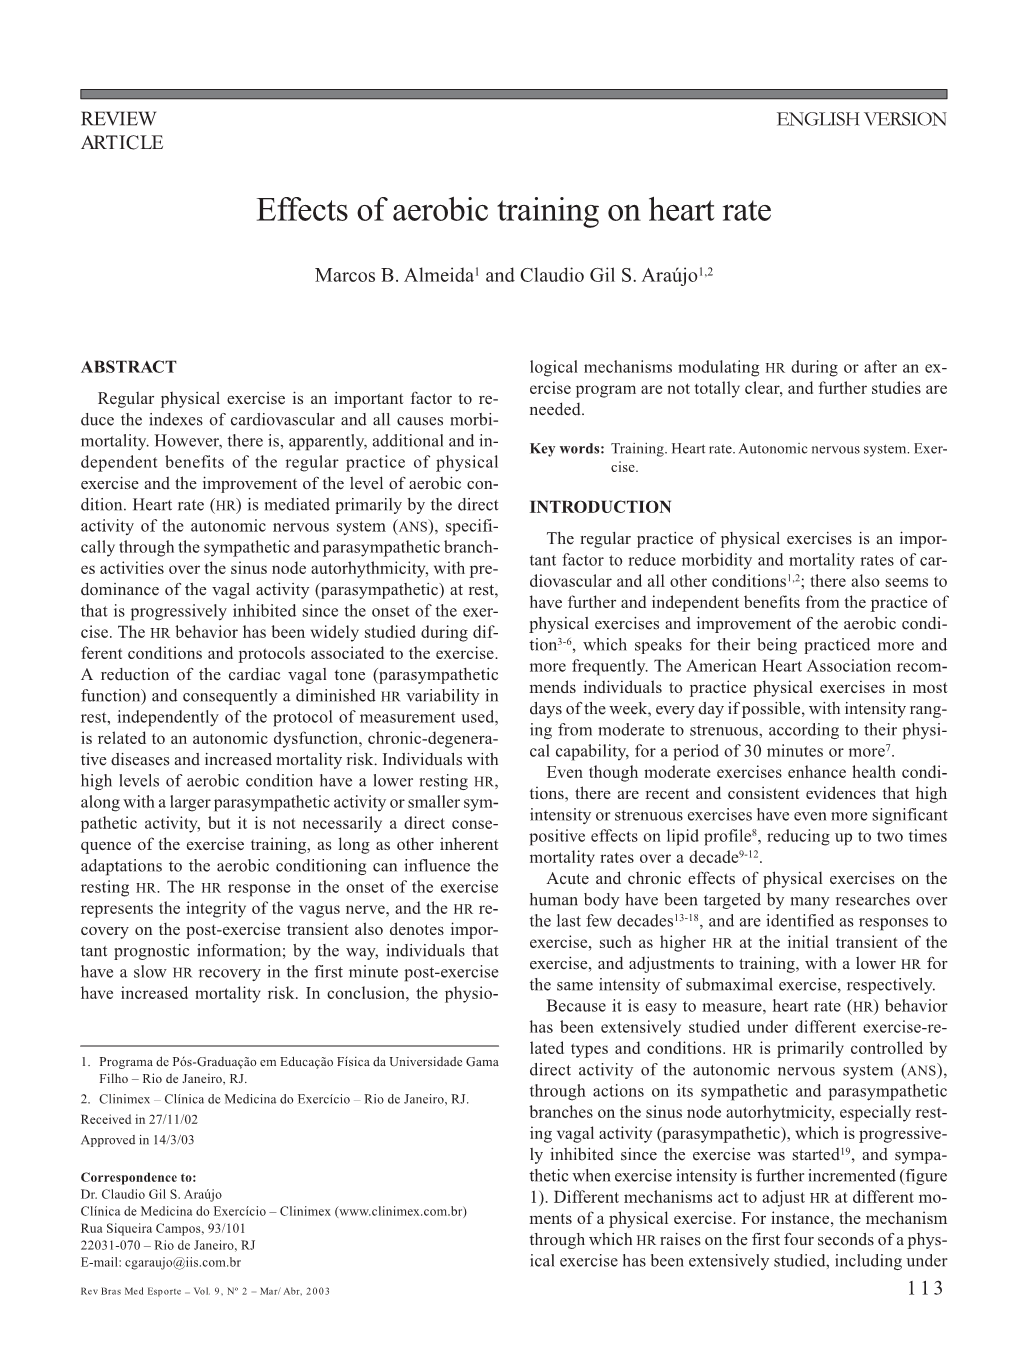 Effects of Aerobic Training on Heart Rate